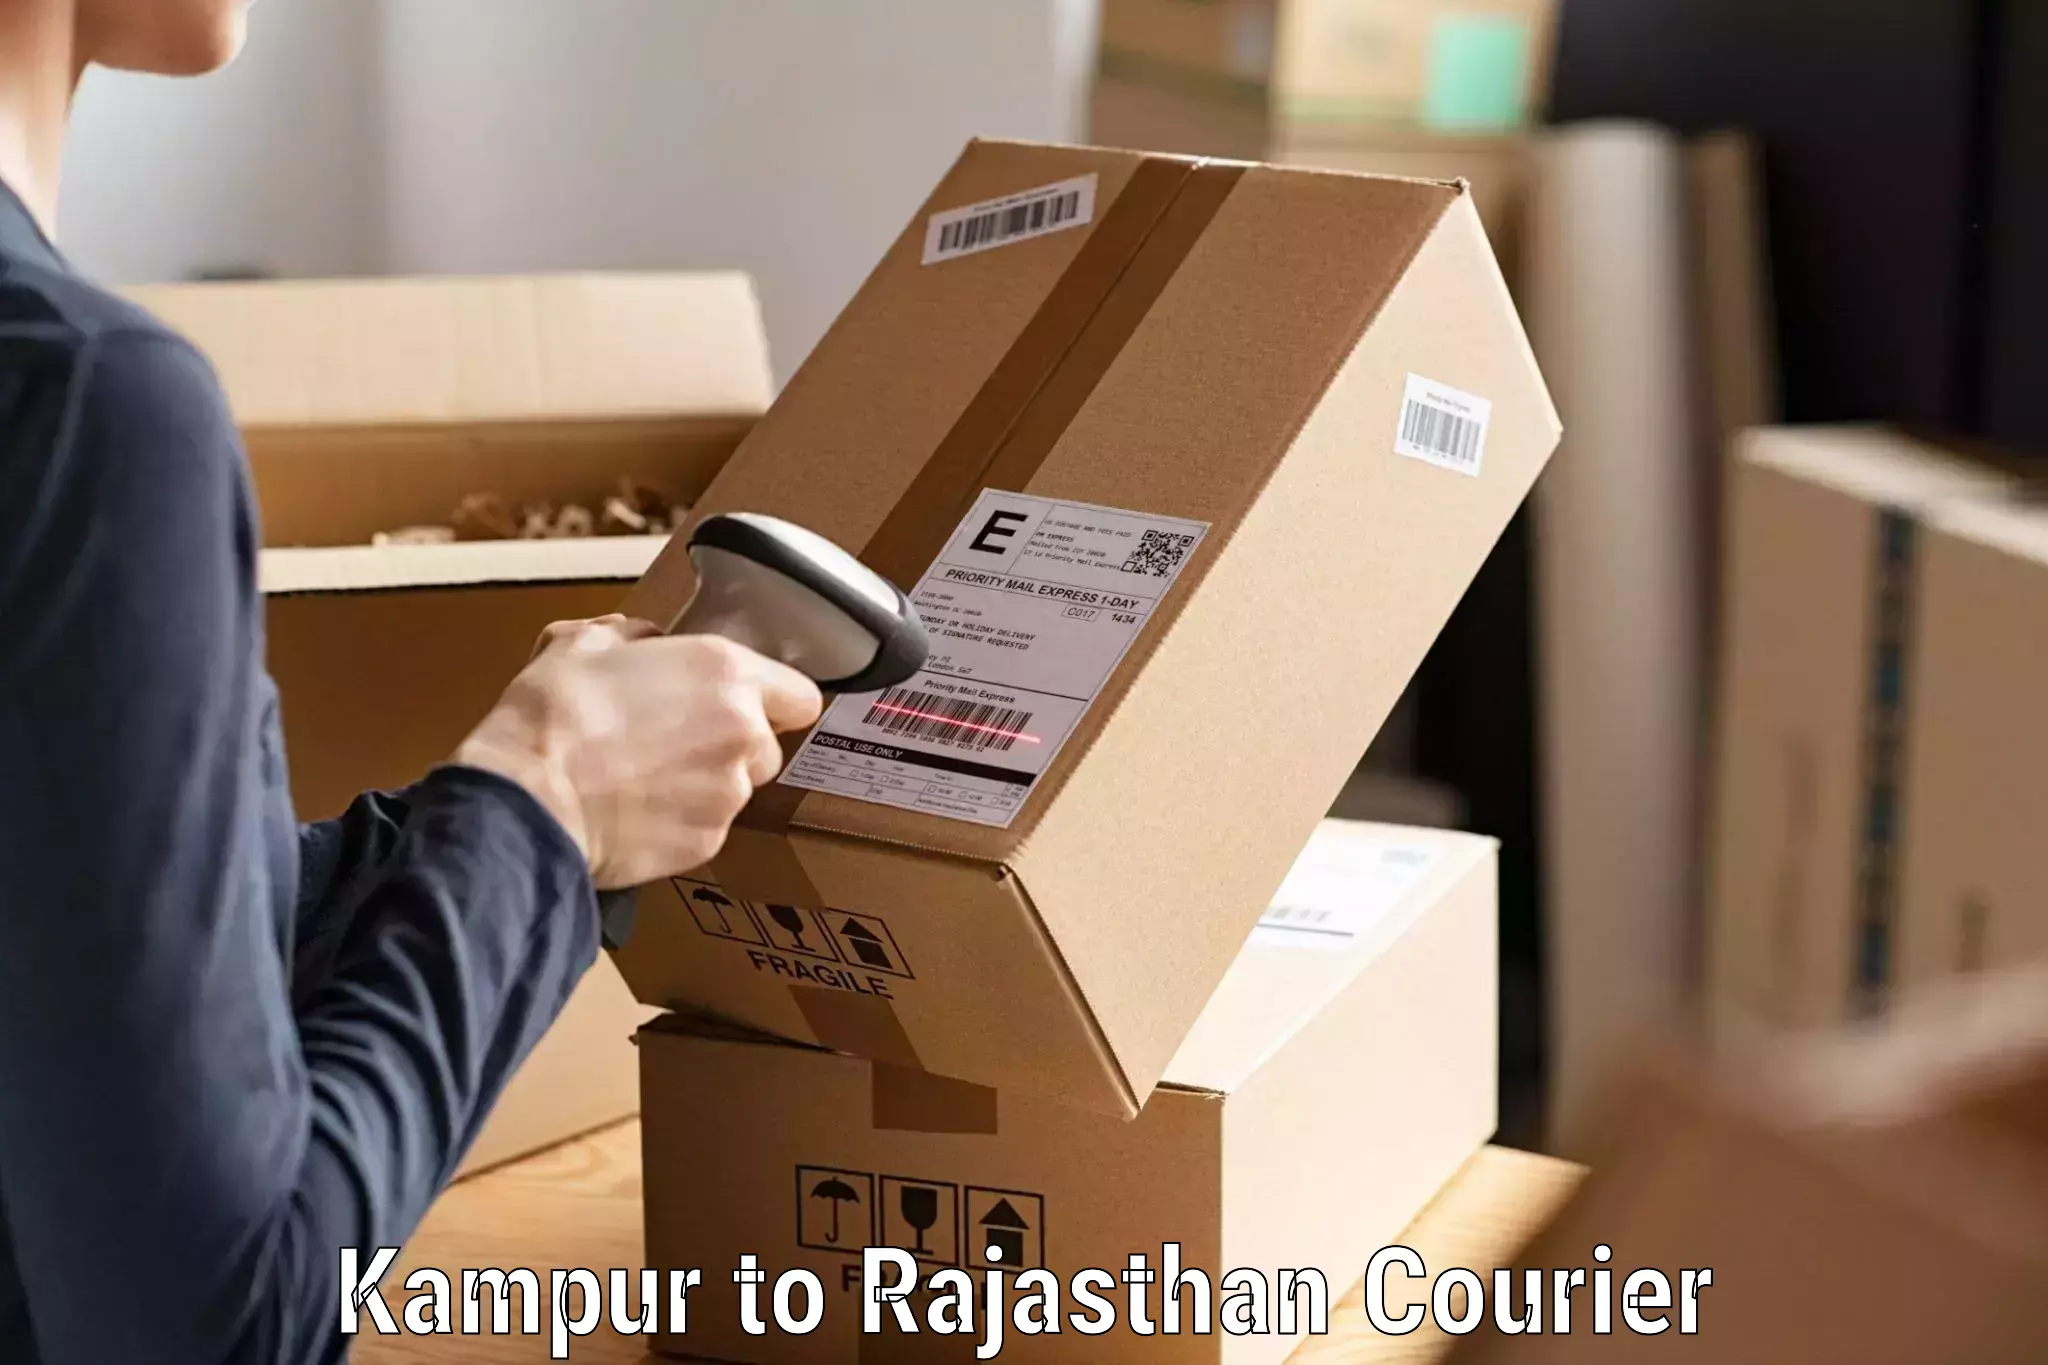 Express delivery network Kampur to Rajasthan